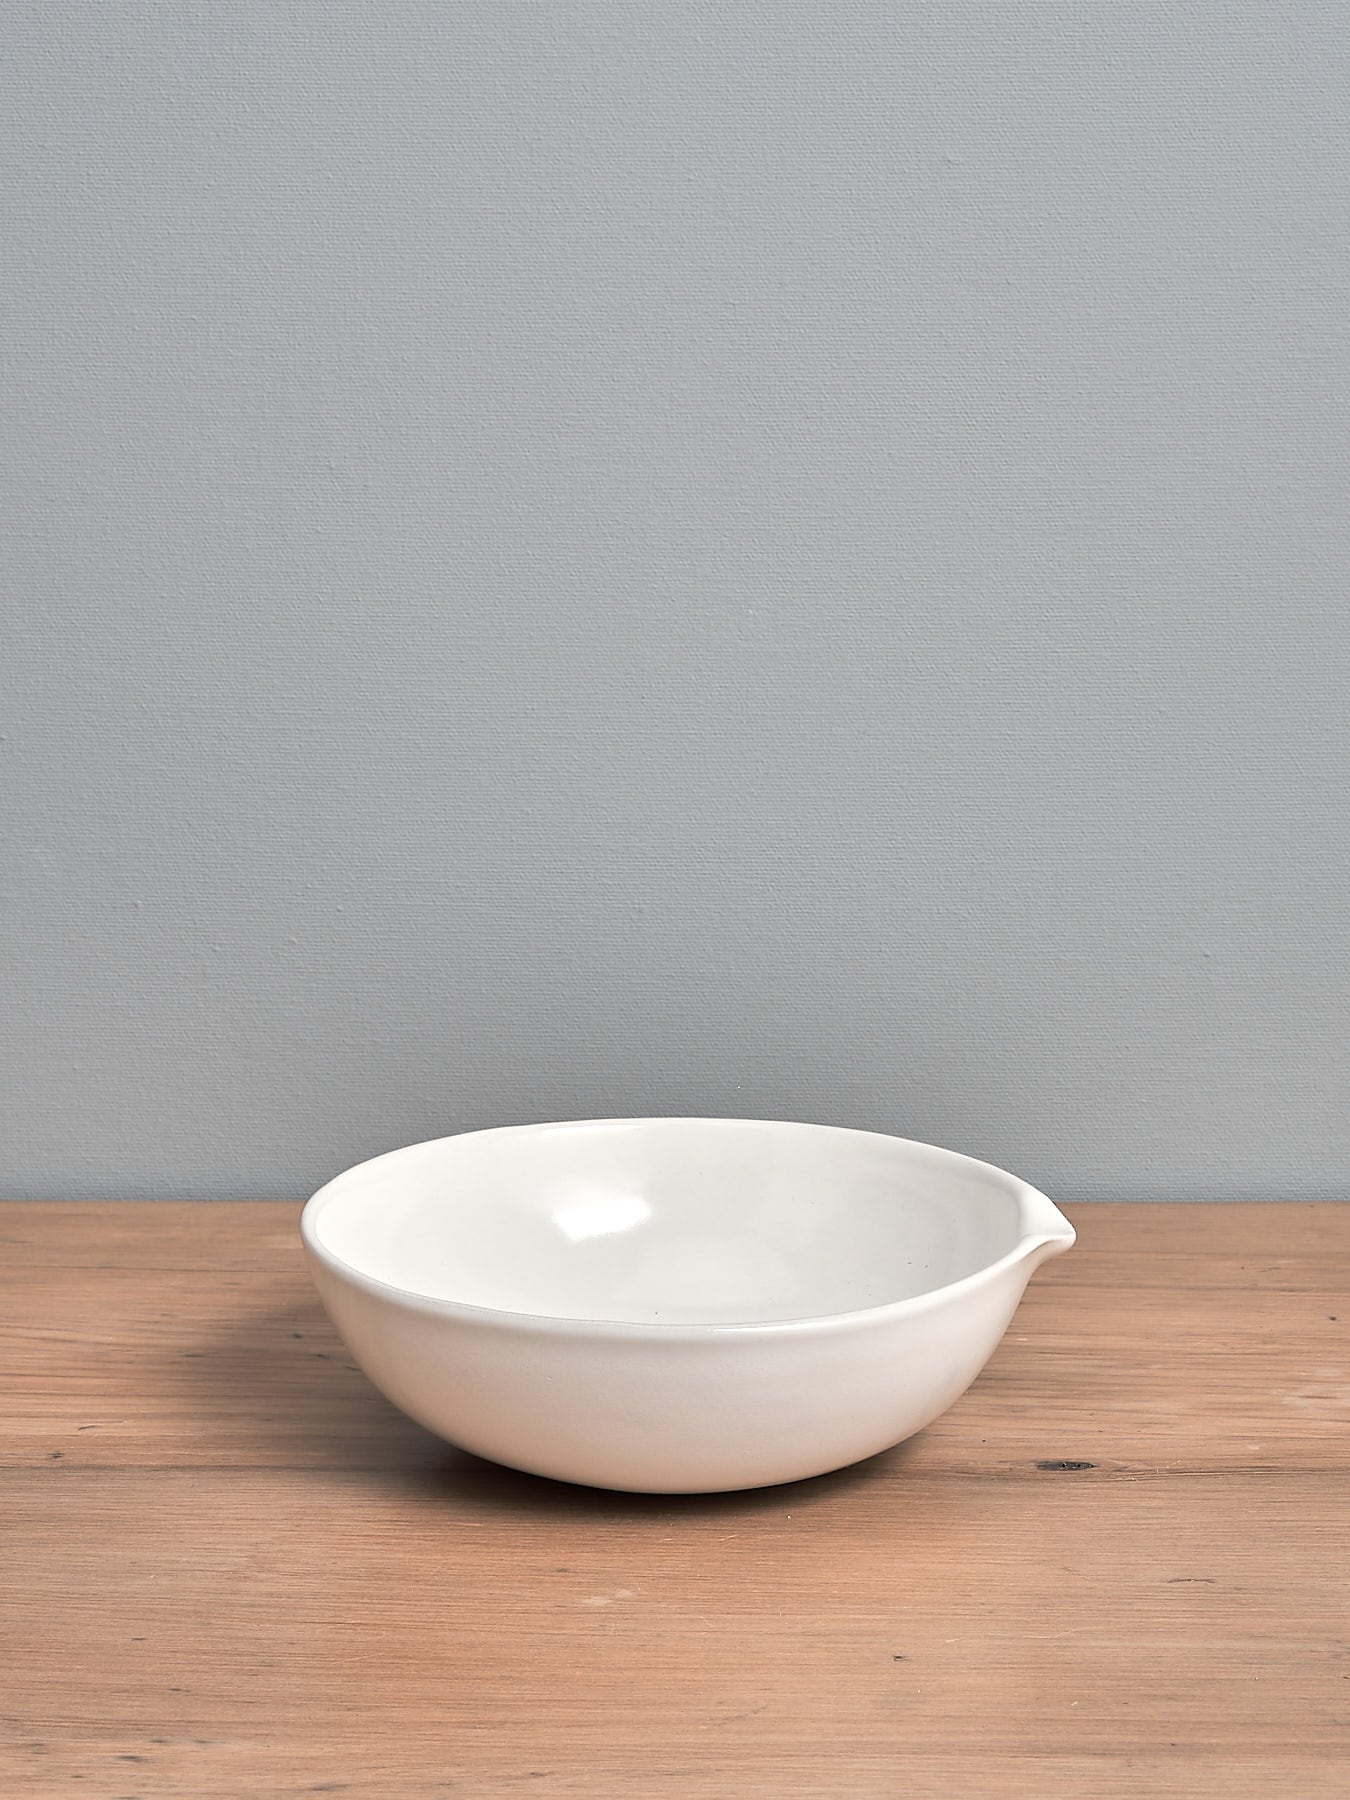 A Medium Lab Bowl - Satin White by Gidon Bing sitting on a wooden table.